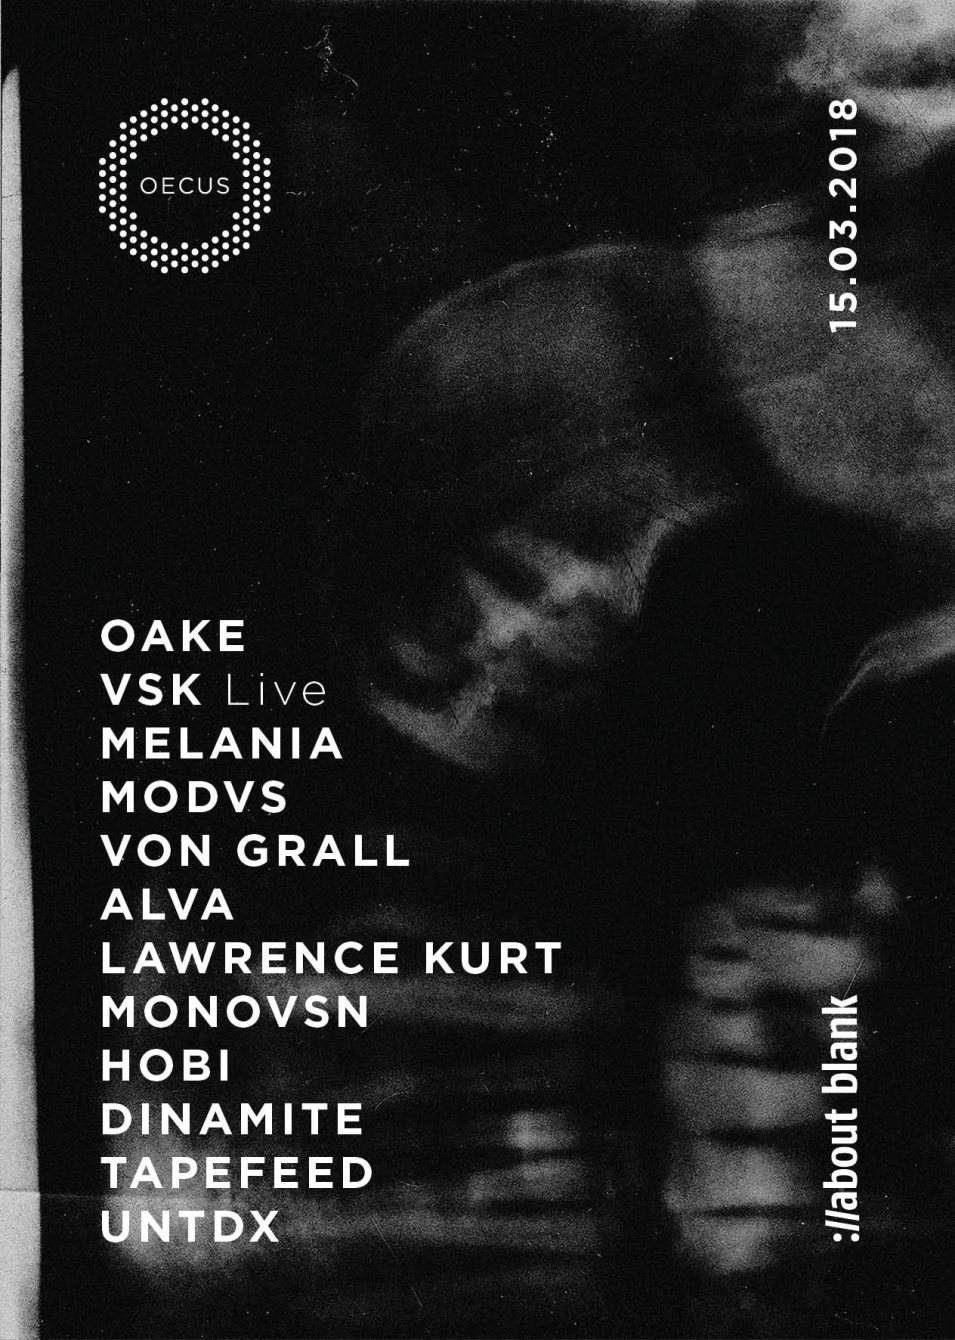 3 Years of OECUS with OAKE, VSK (Live), Von Grall, Melania & More - Página frontal